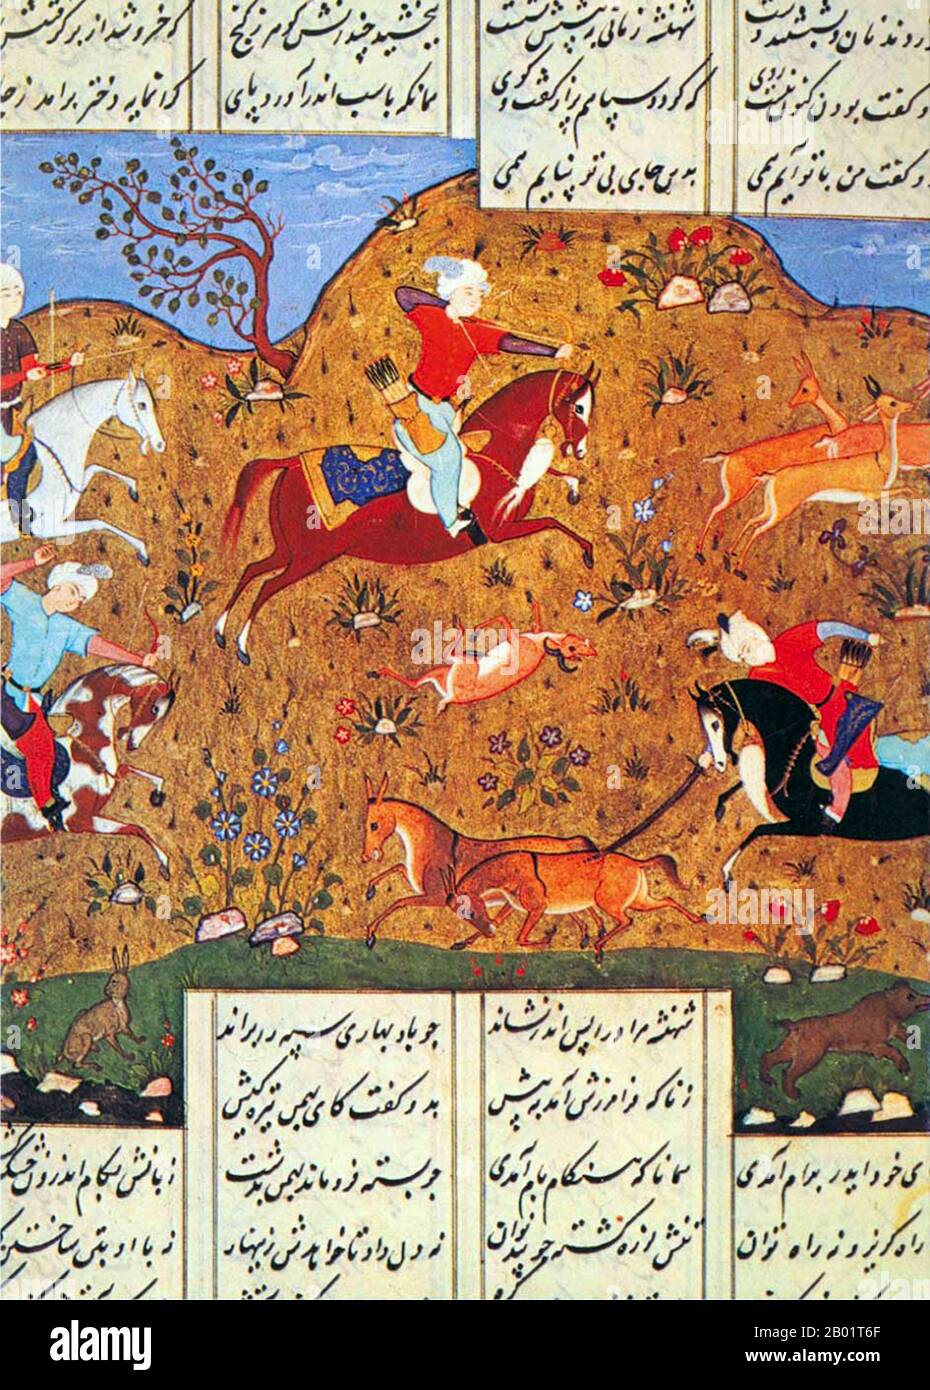 Iran/Persia: A hunting scene. Safavid miniature painting, 16th-17th century.  A Persian miniature is a small painting on paper, whether a book illustration or a separate work of art intended to be kept in an album of such works called a muraqqa. The techniques are broadly comparable to the Western and Byzantine traditions of miniatures in illuminated manuscripts. Although there is an equally well-established Persian tradition of wall-painting, the survival rate and state of preservation of miniatures is better, and miniatures are much the best-known form of Persian painting in the West. Stock Photo